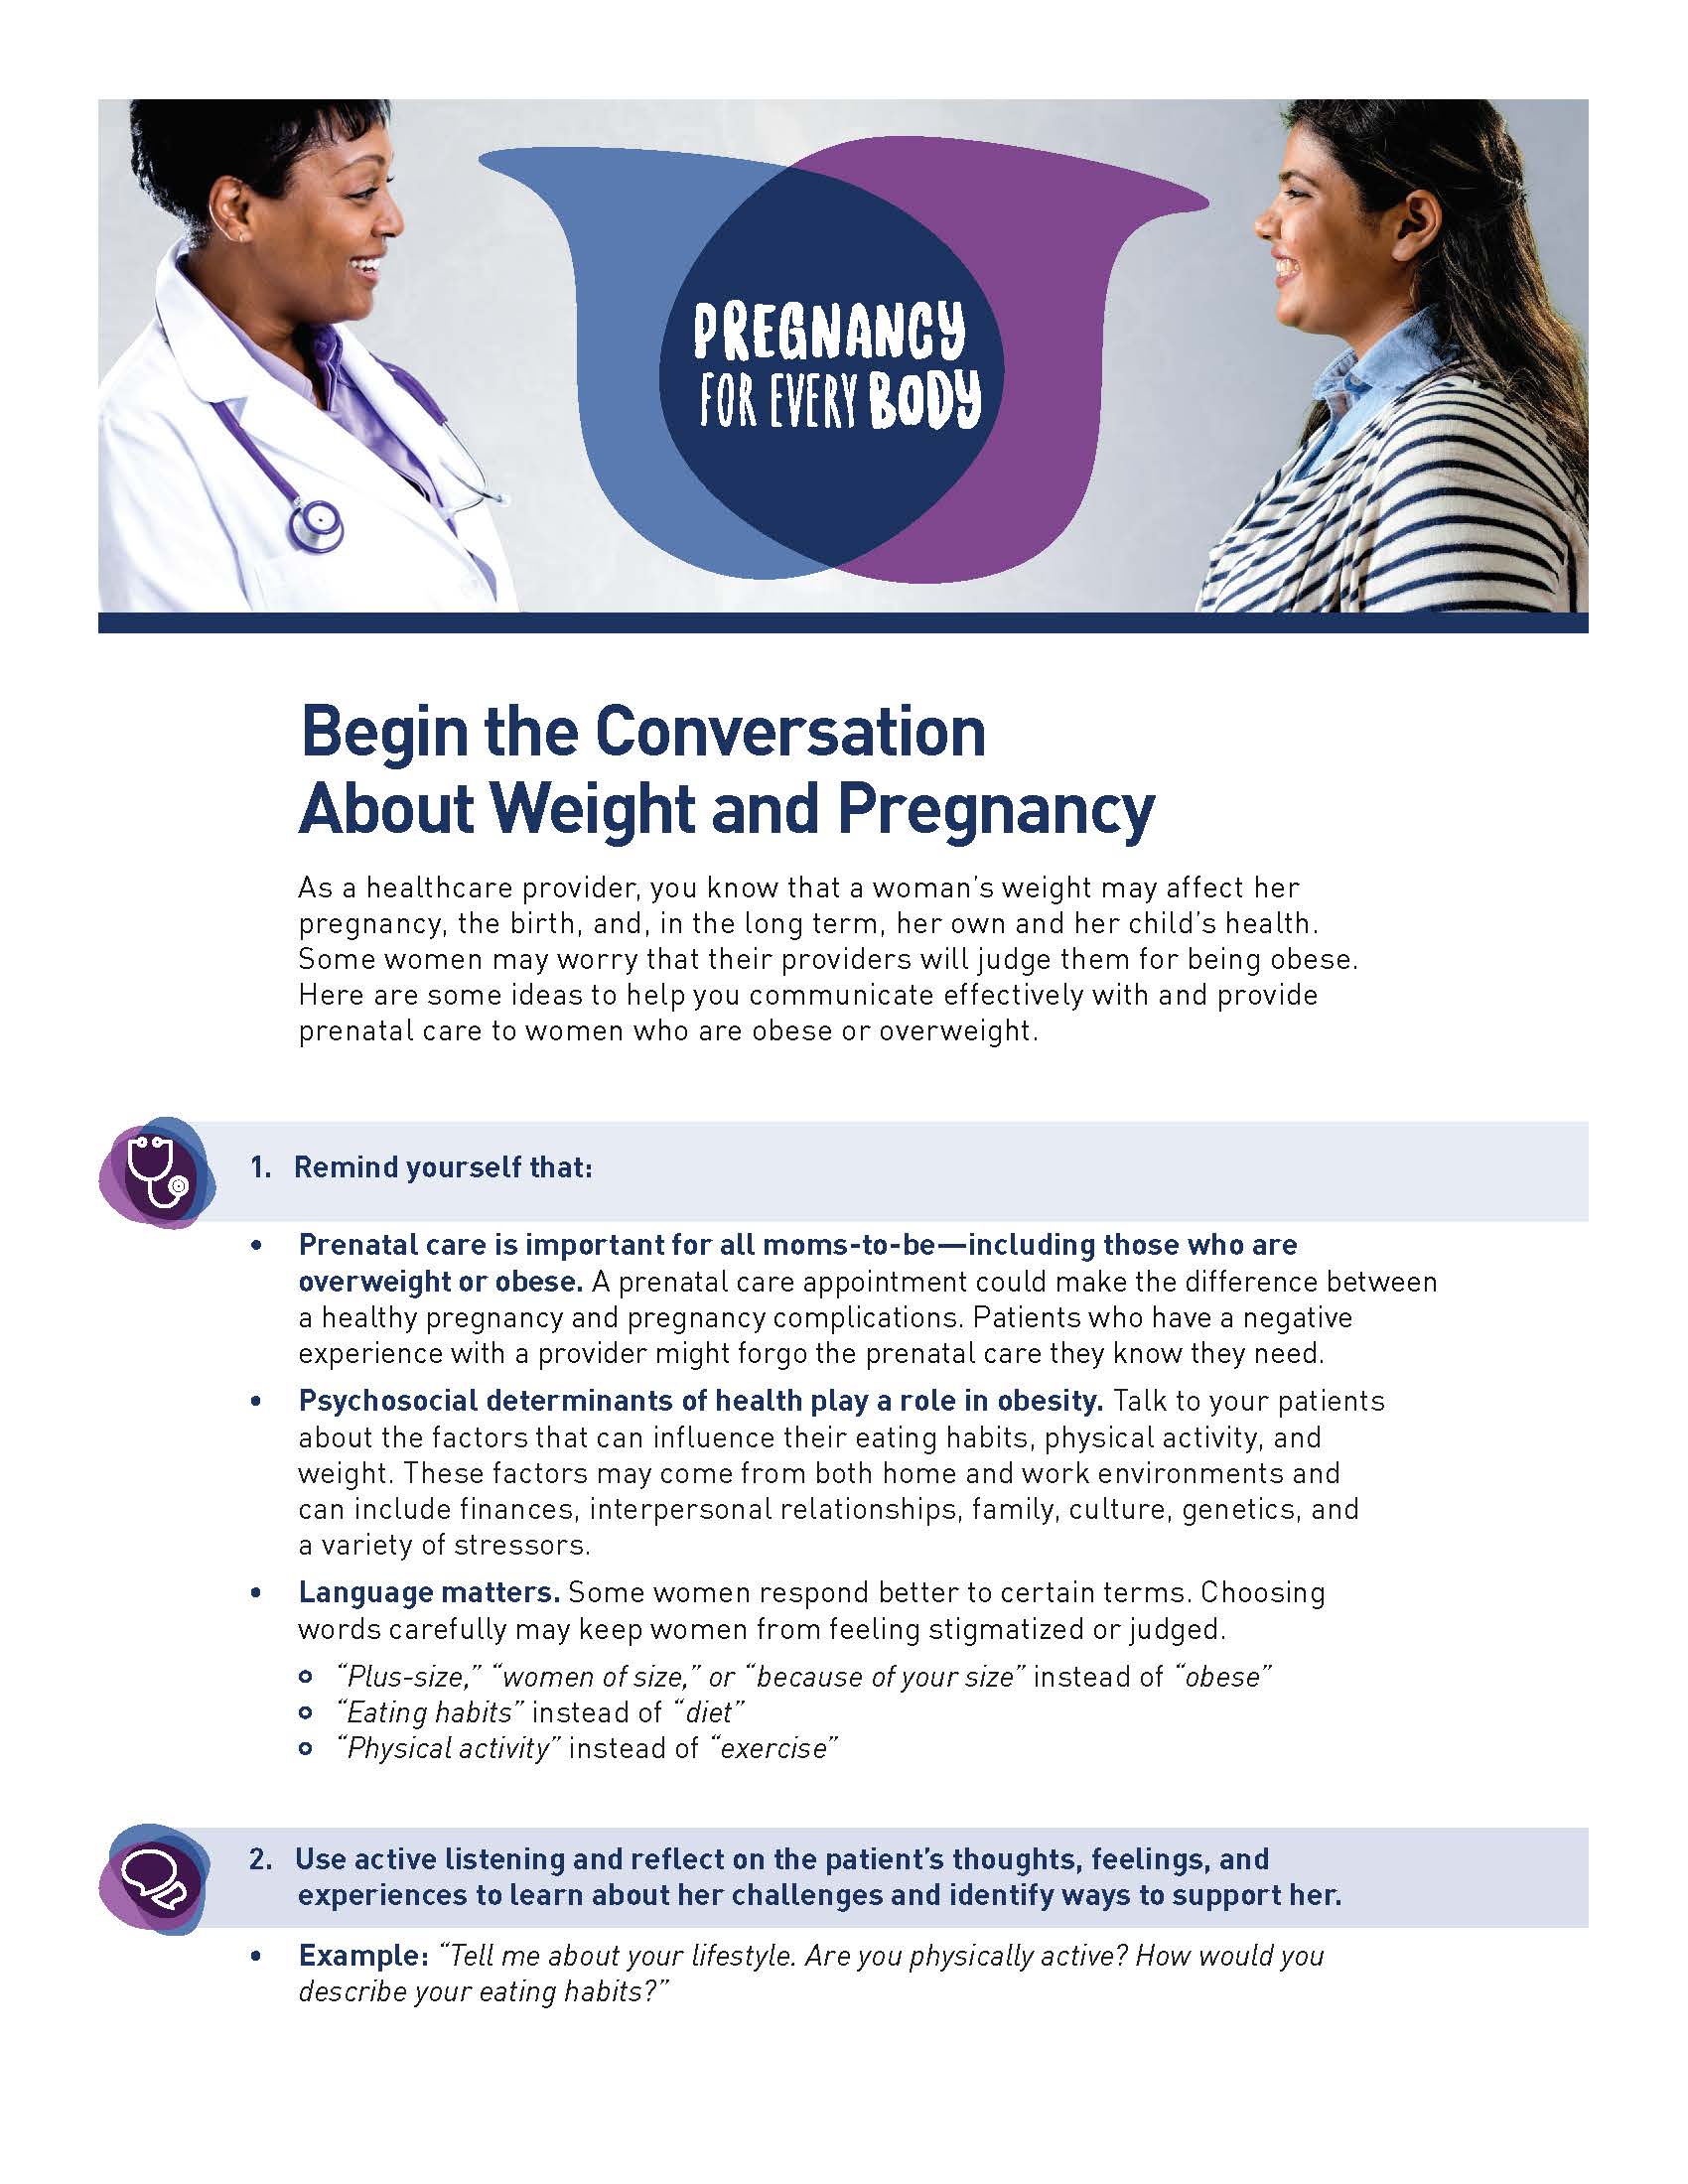 Image of the Pregnancy for Every Body Factsheet: Begin the Conversation About Weight and Pregnancy.